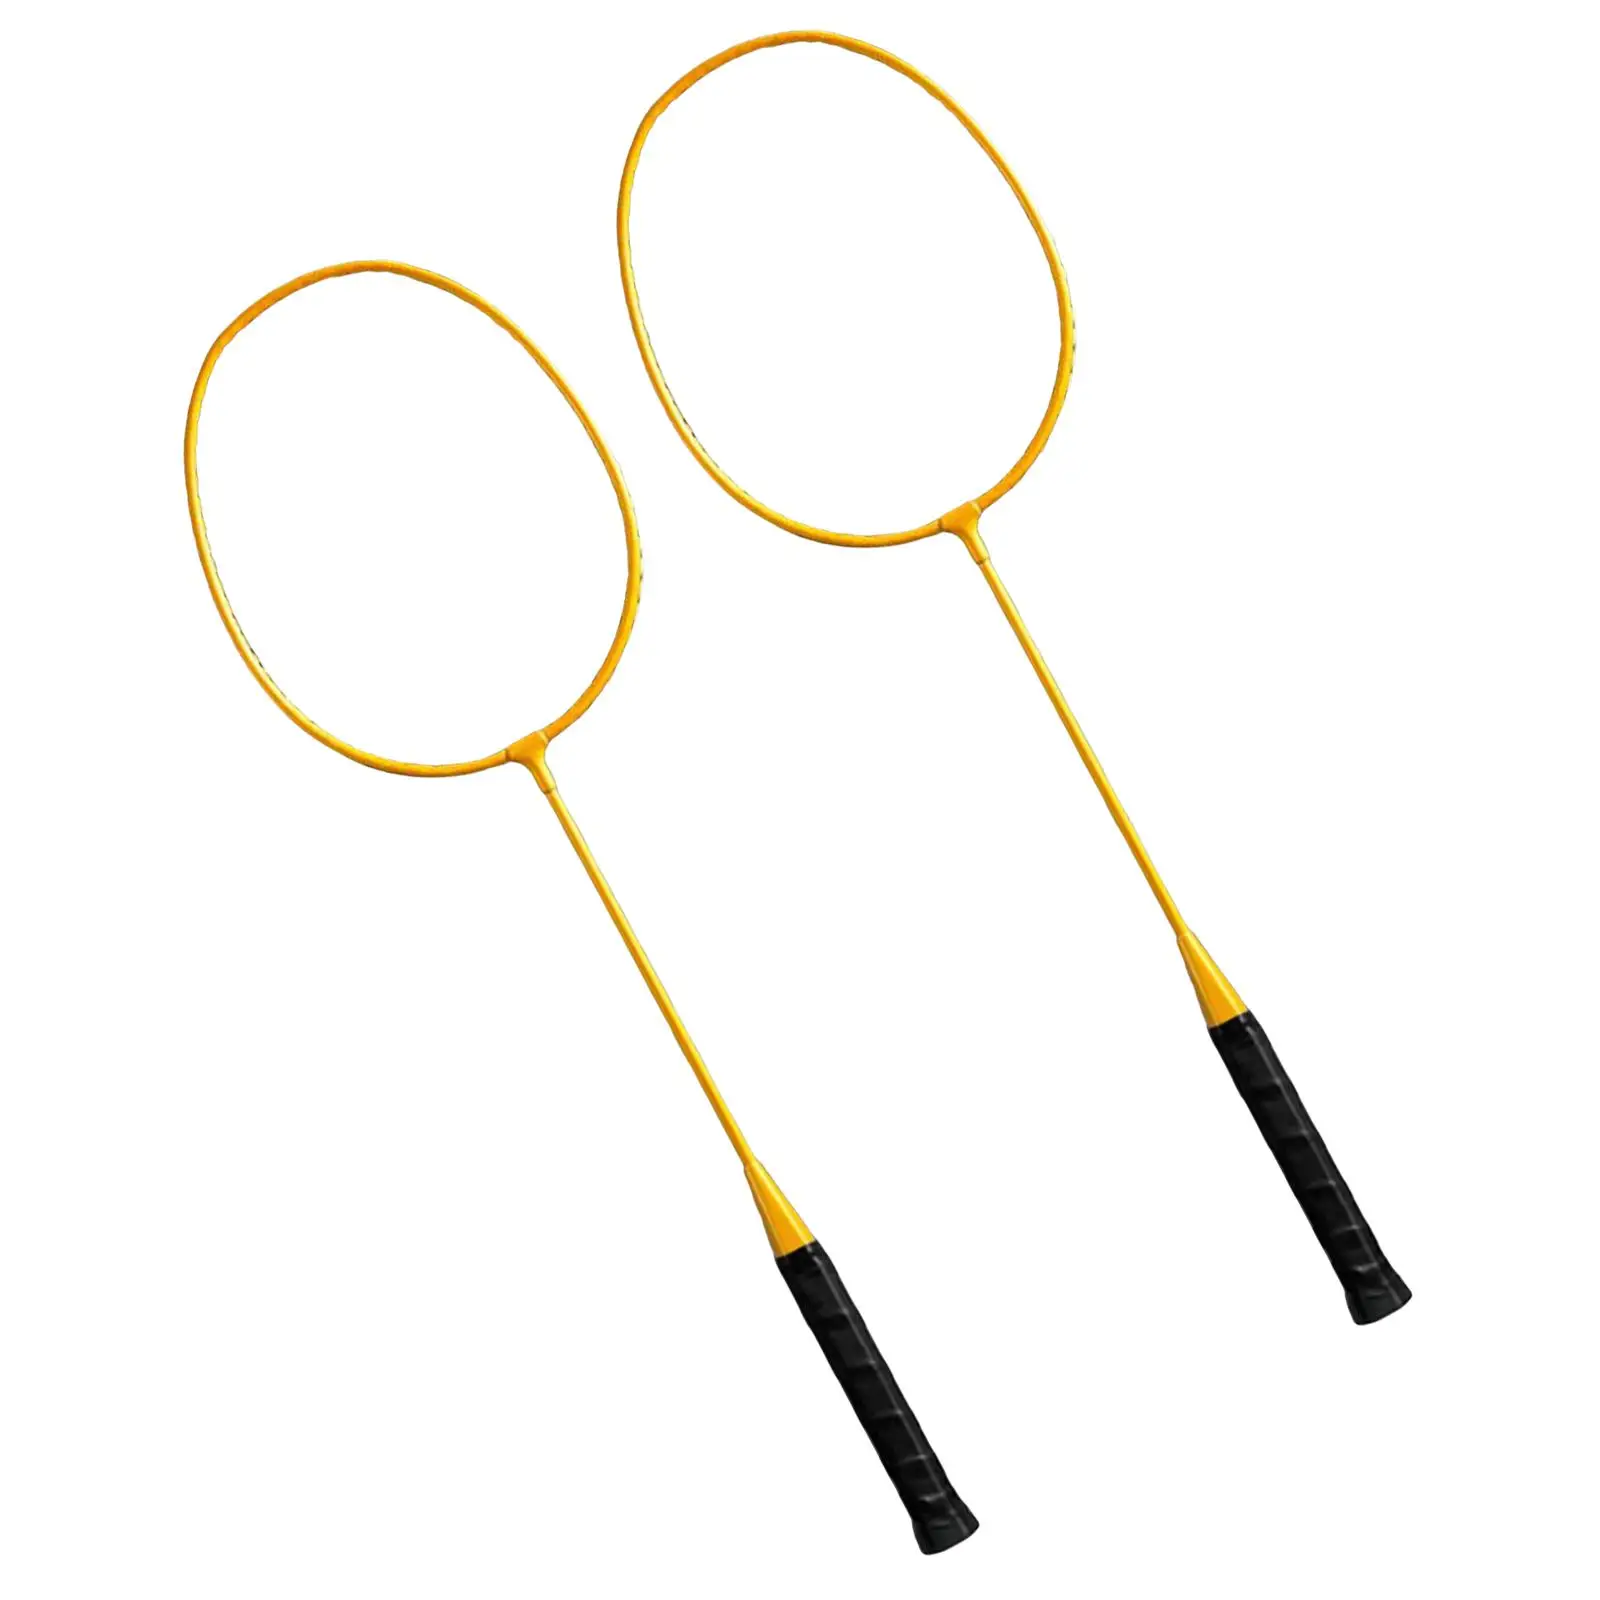 

2Pcs Professional Badminton Rackets Set Lightweight Alloy Playing Double Racquets for Games Tennis Beach Equipment Players